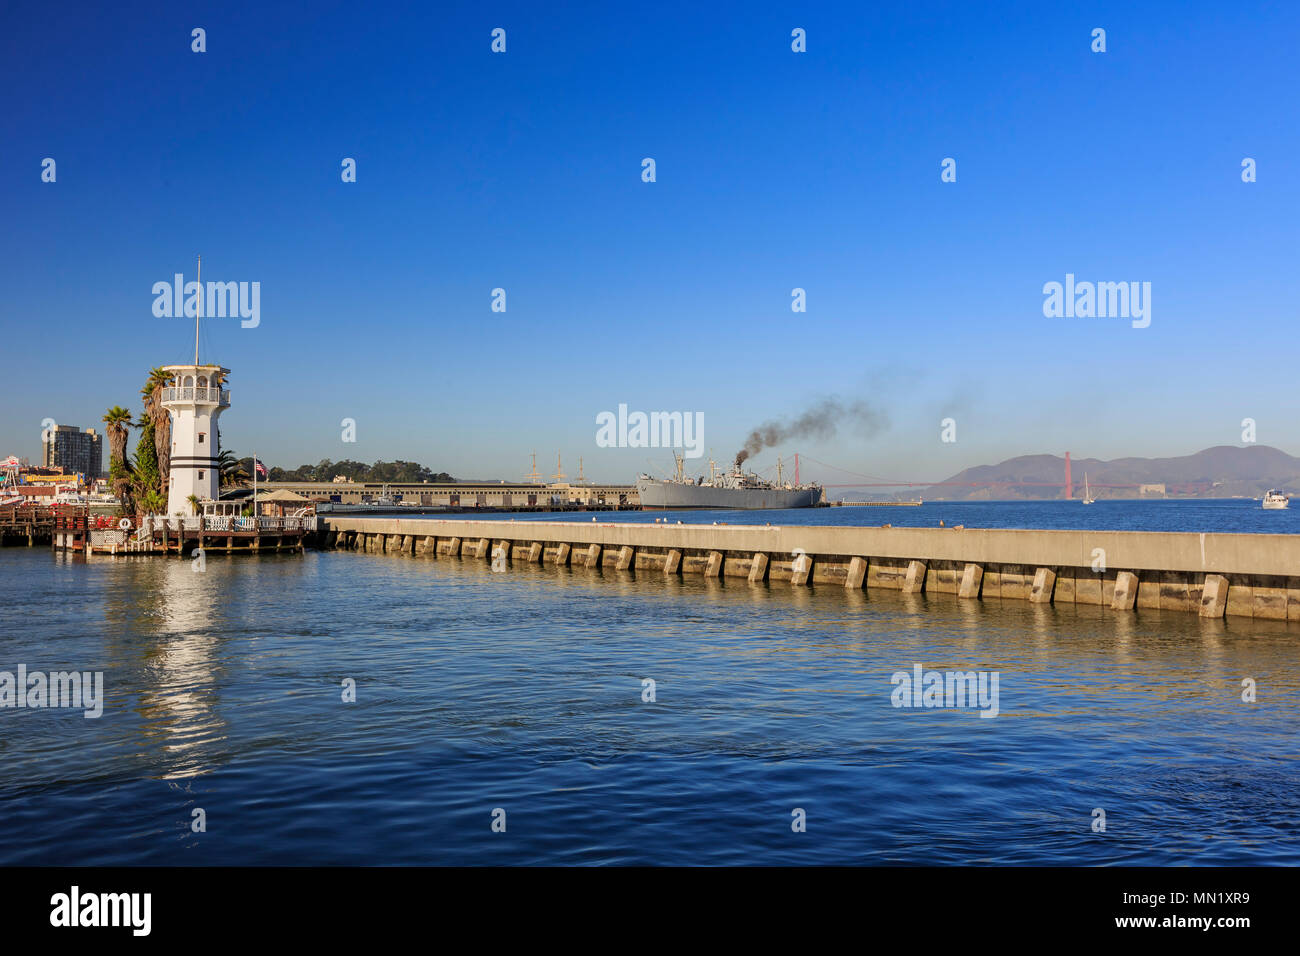 The beautiful Pier 39 and light house at San Francisco Stock Photo